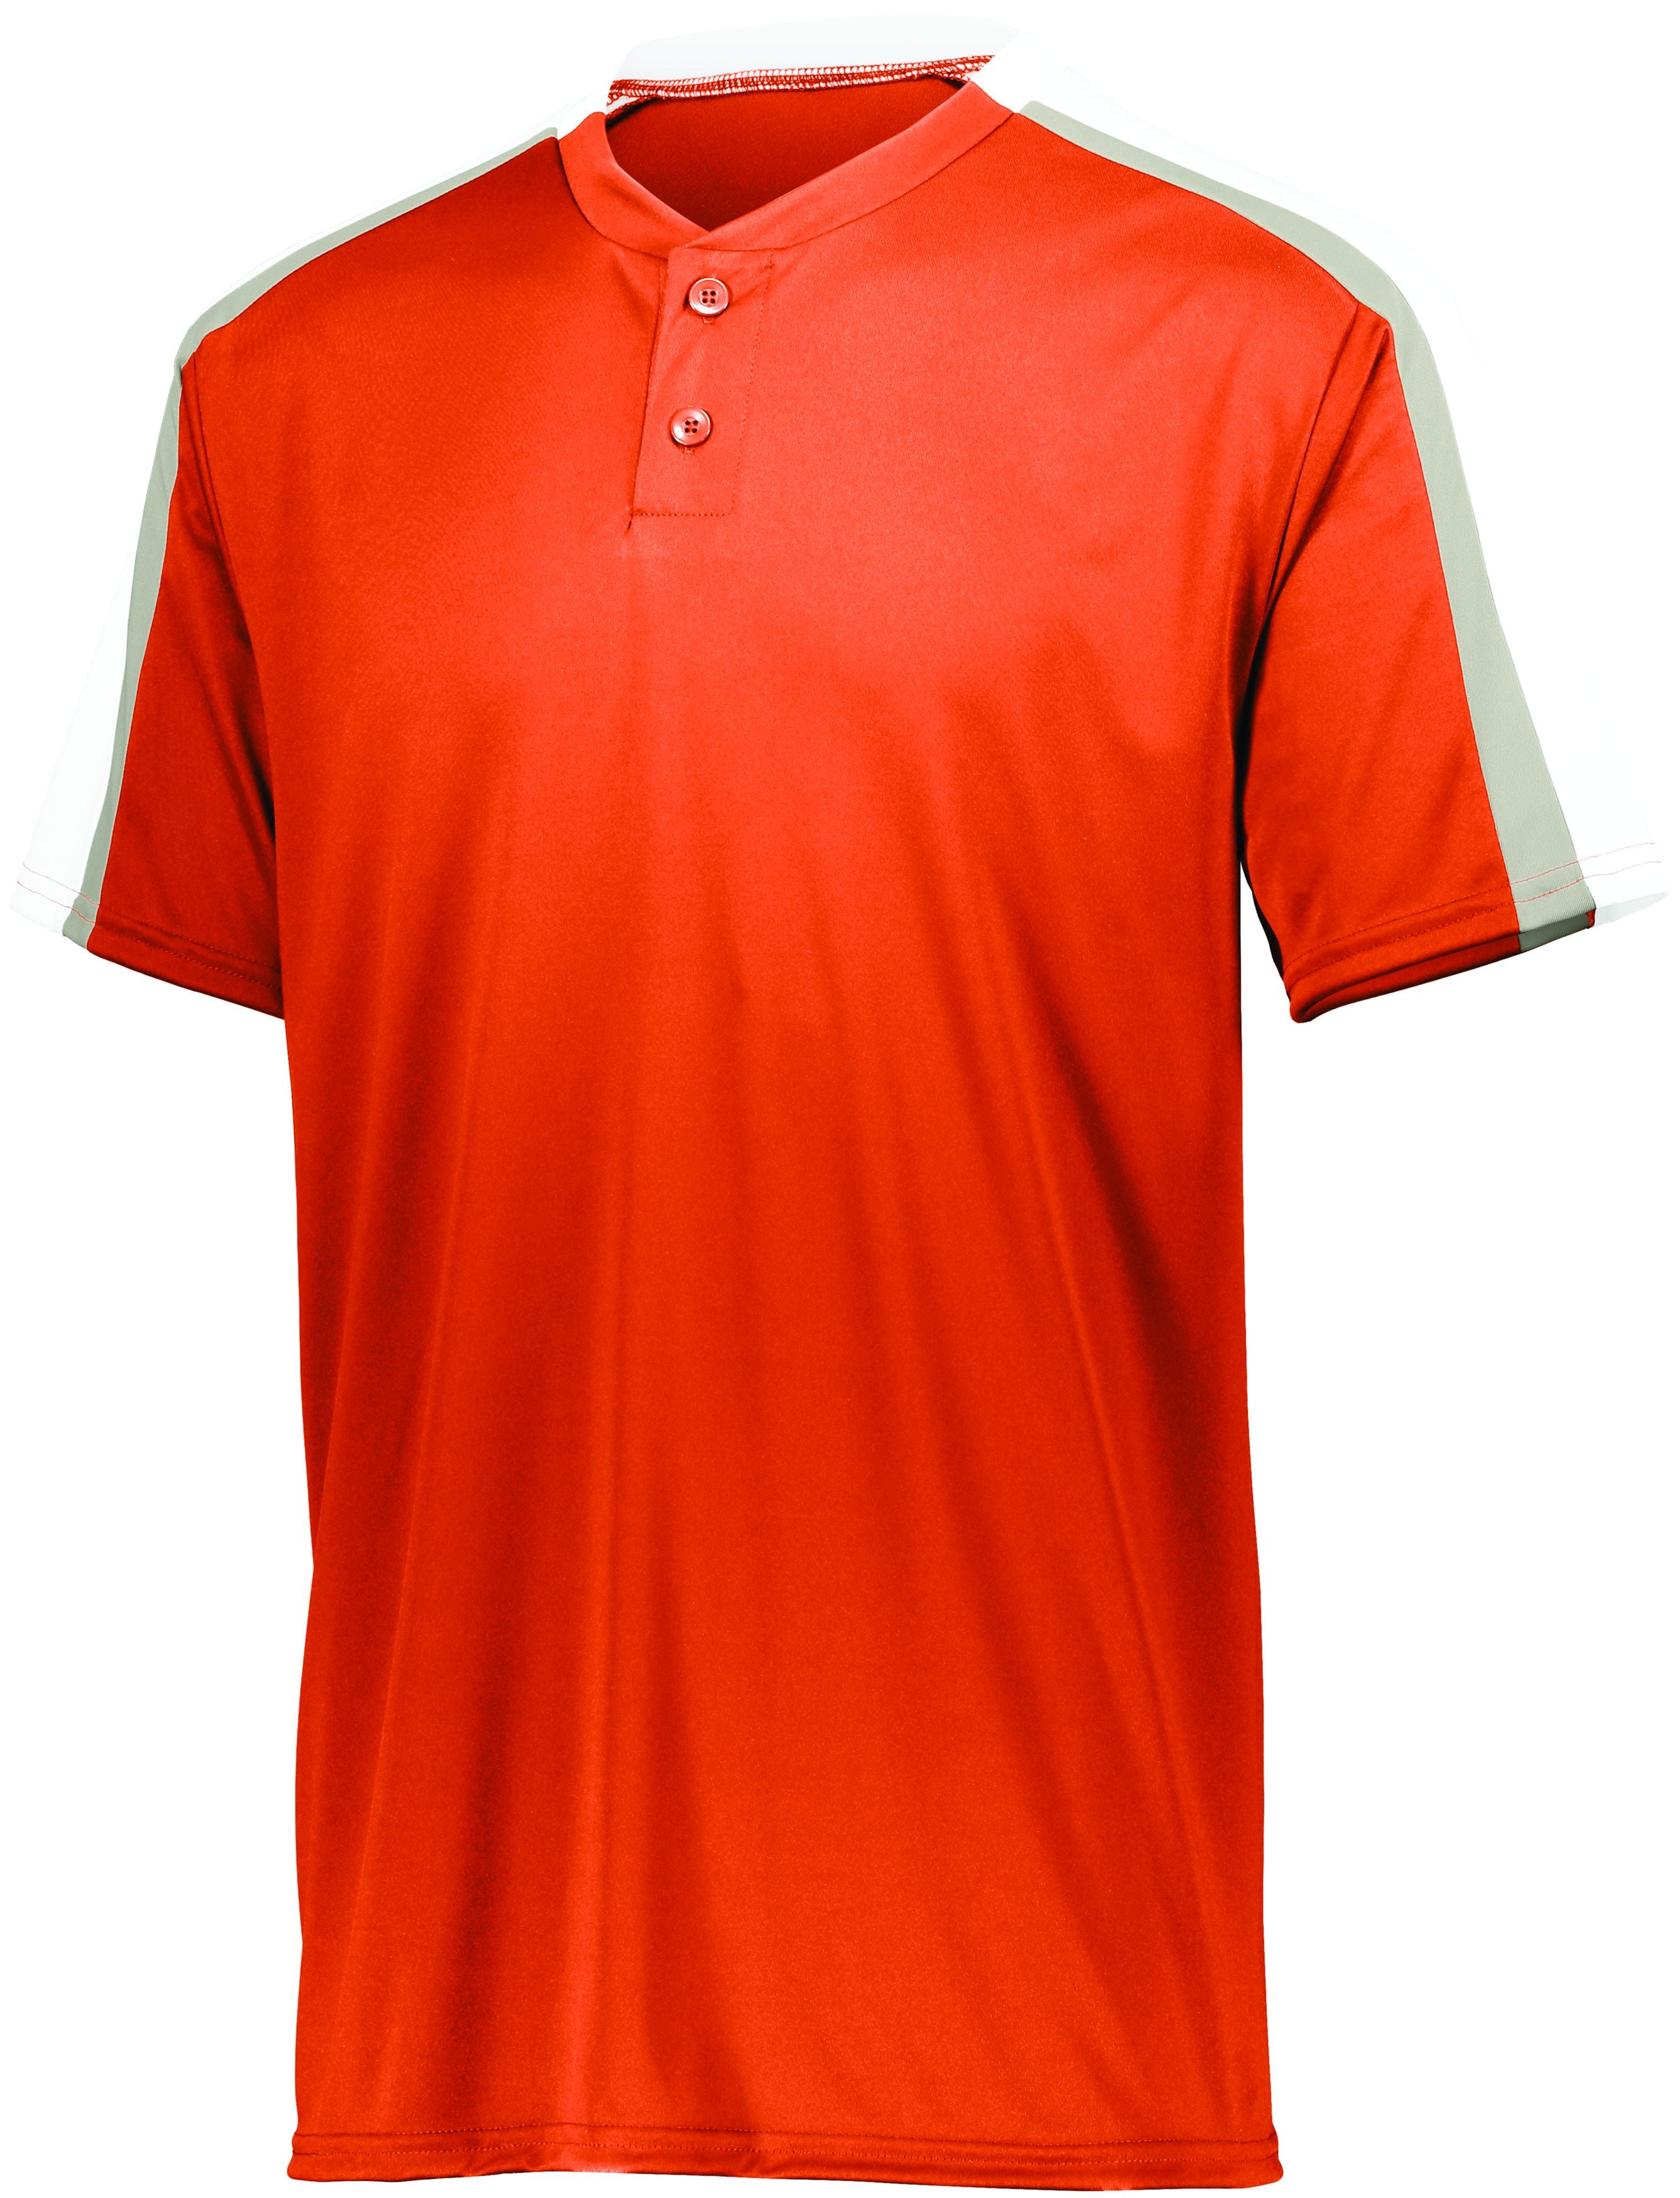 Augusta Sportswear Power Plus Jersey 2.0 in Orange/White/Silver Grey  -Part of the Adult, Adult-Jersey, Augusta-Products, Baseball, Shirts, All-Sports, All-Sports-1 product lines at KanaleyCreations.com